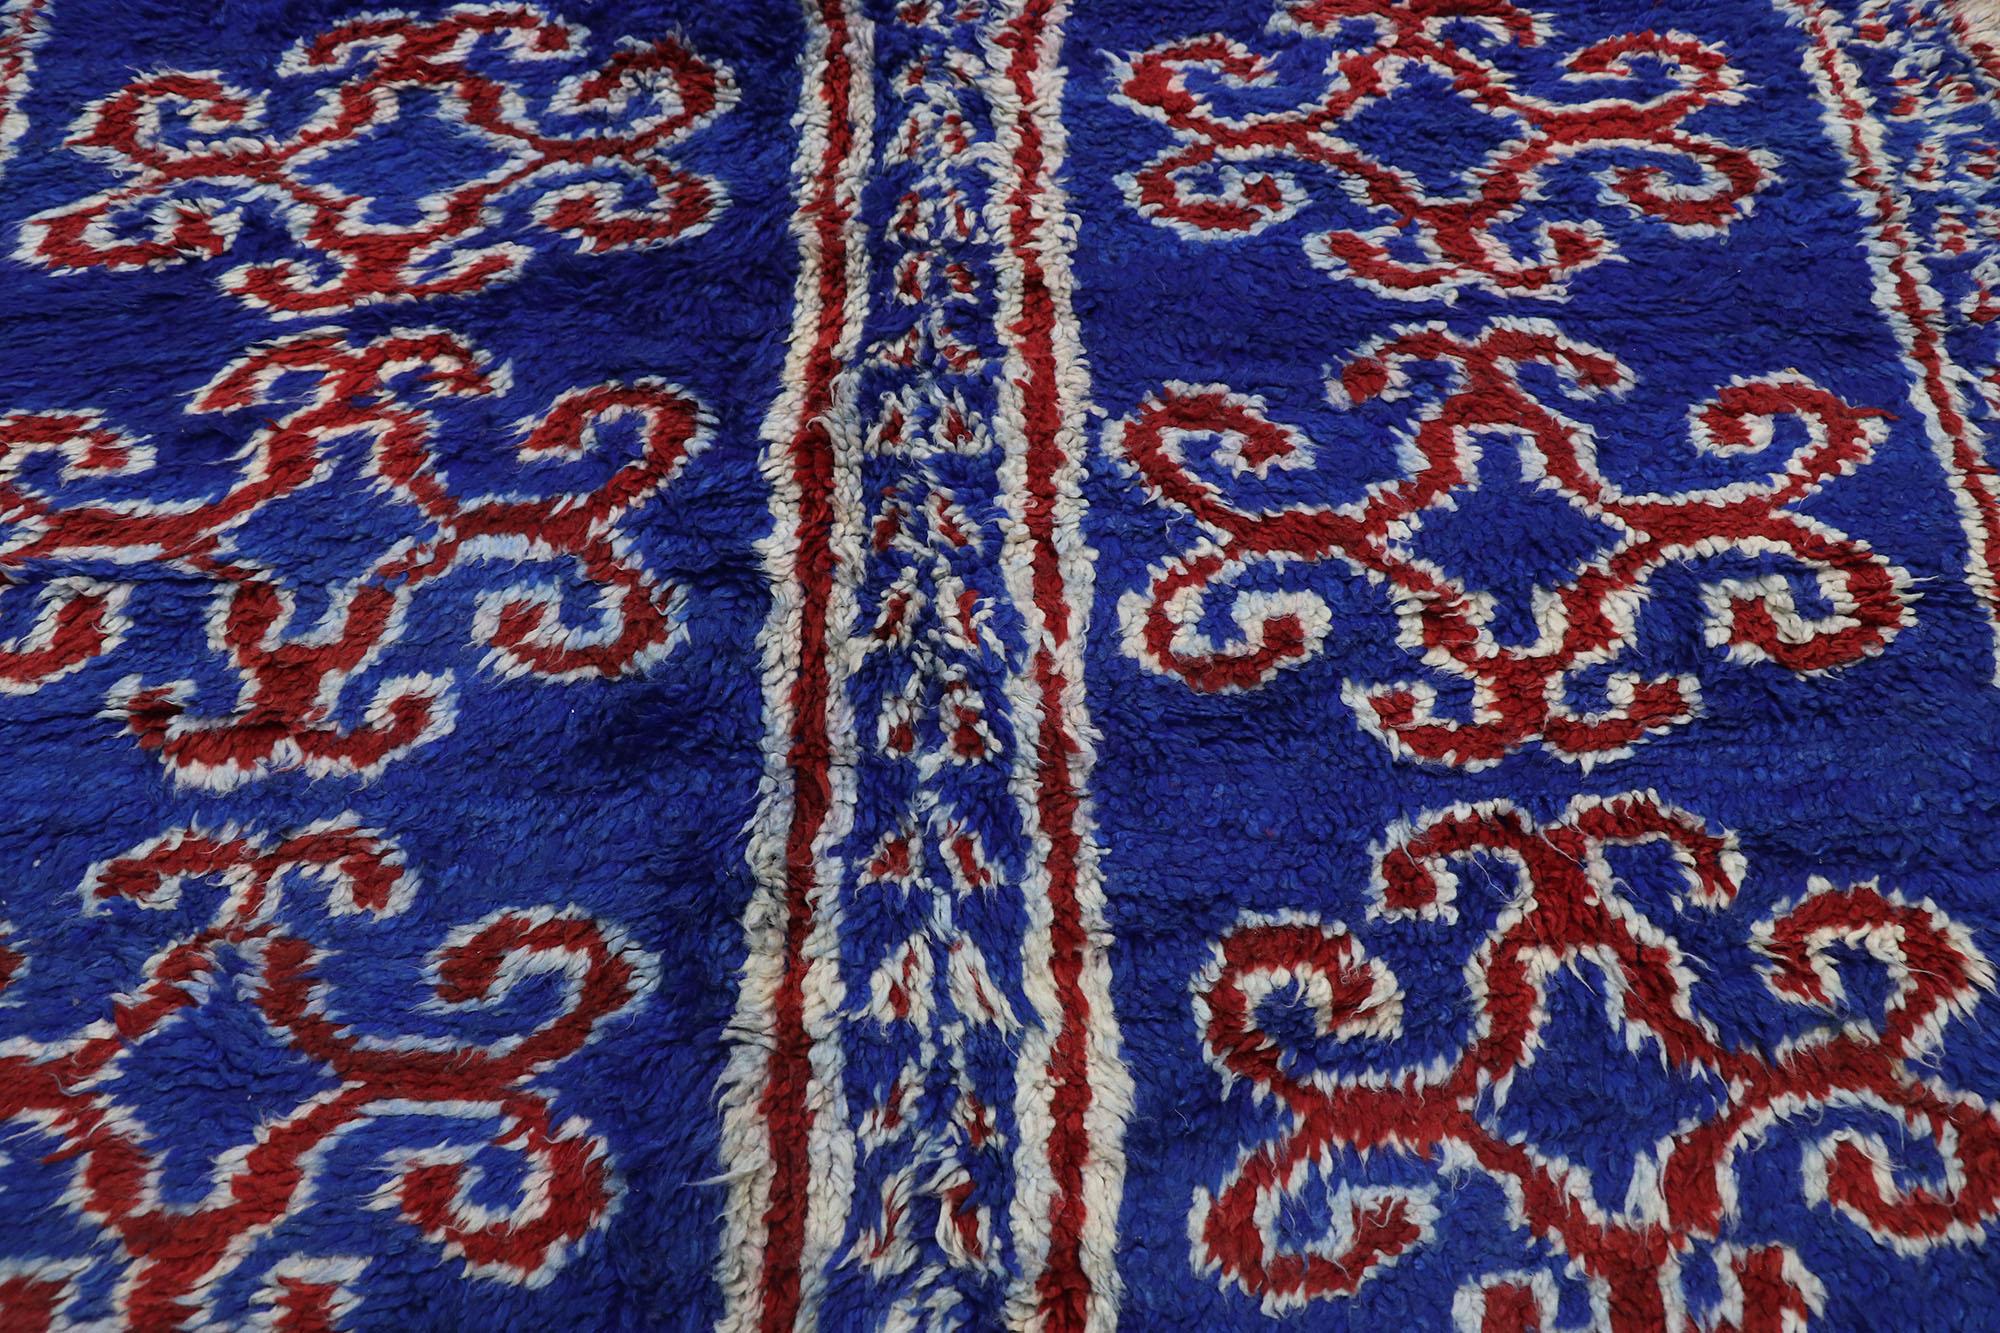 Vintage Berber Blue Beni M'Guild Moroccan Rug with Tribal Style In Good Condition For Sale In Dallas, TX